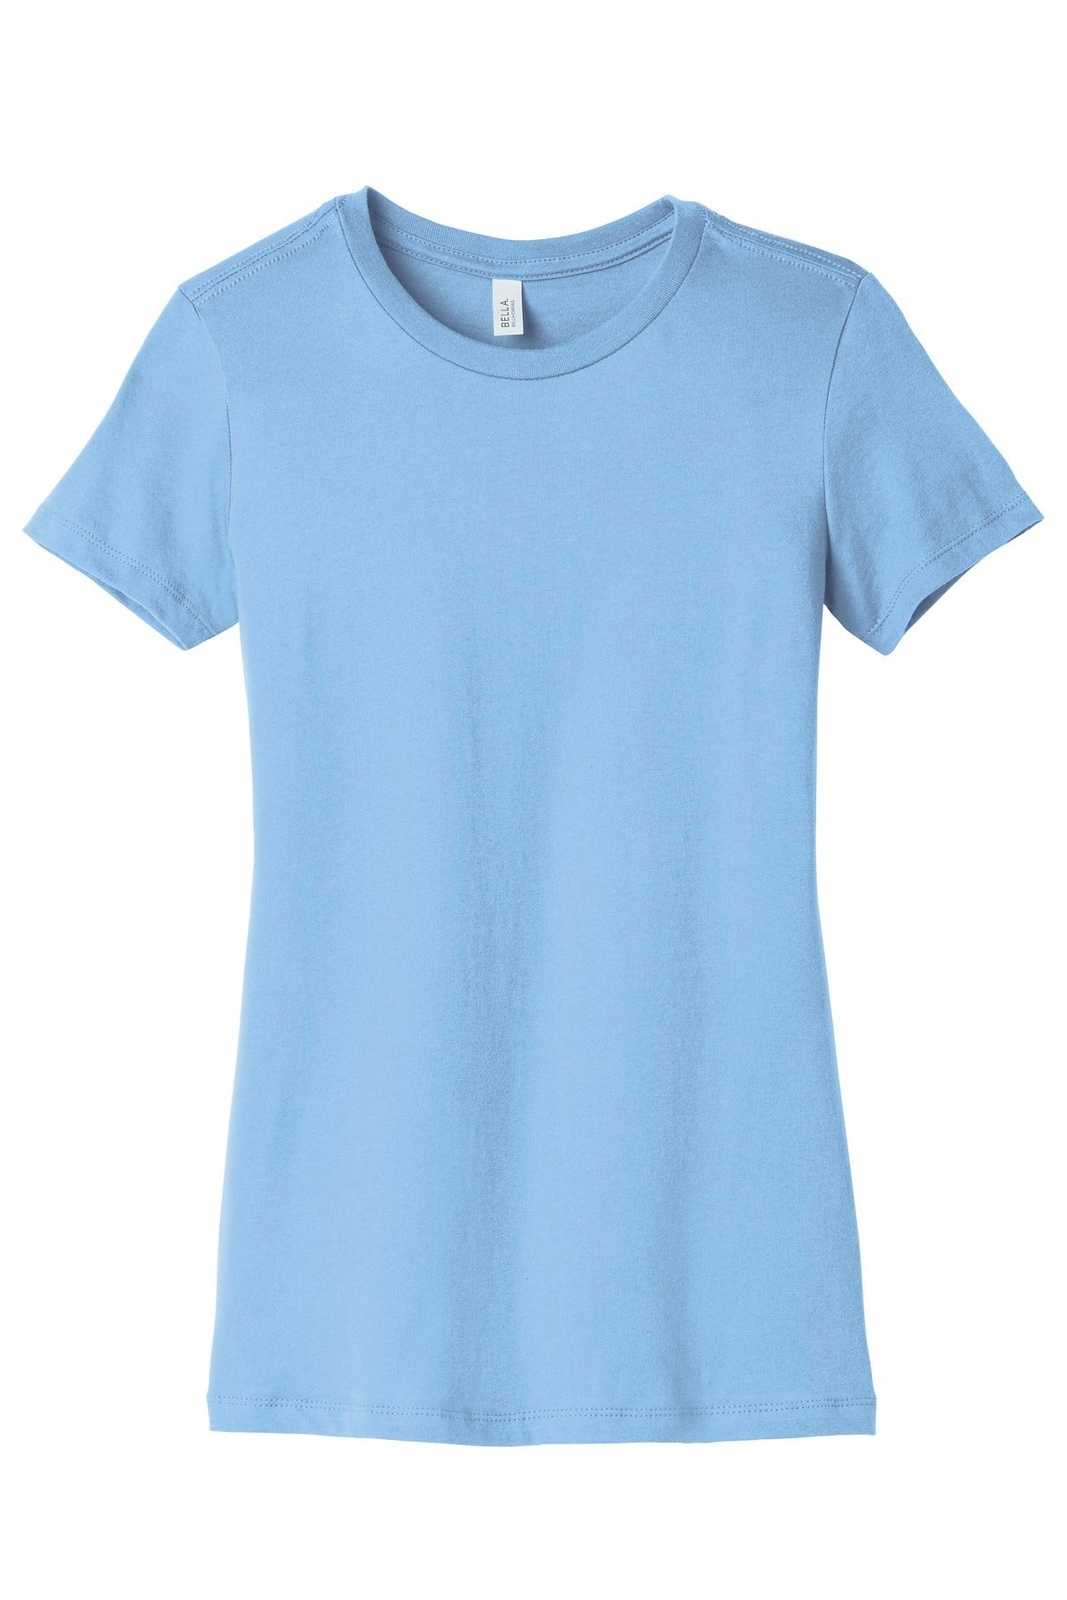 Bella + Canvas 6004 Women's The Favorite Tee - Baby Blue - HIT a Double